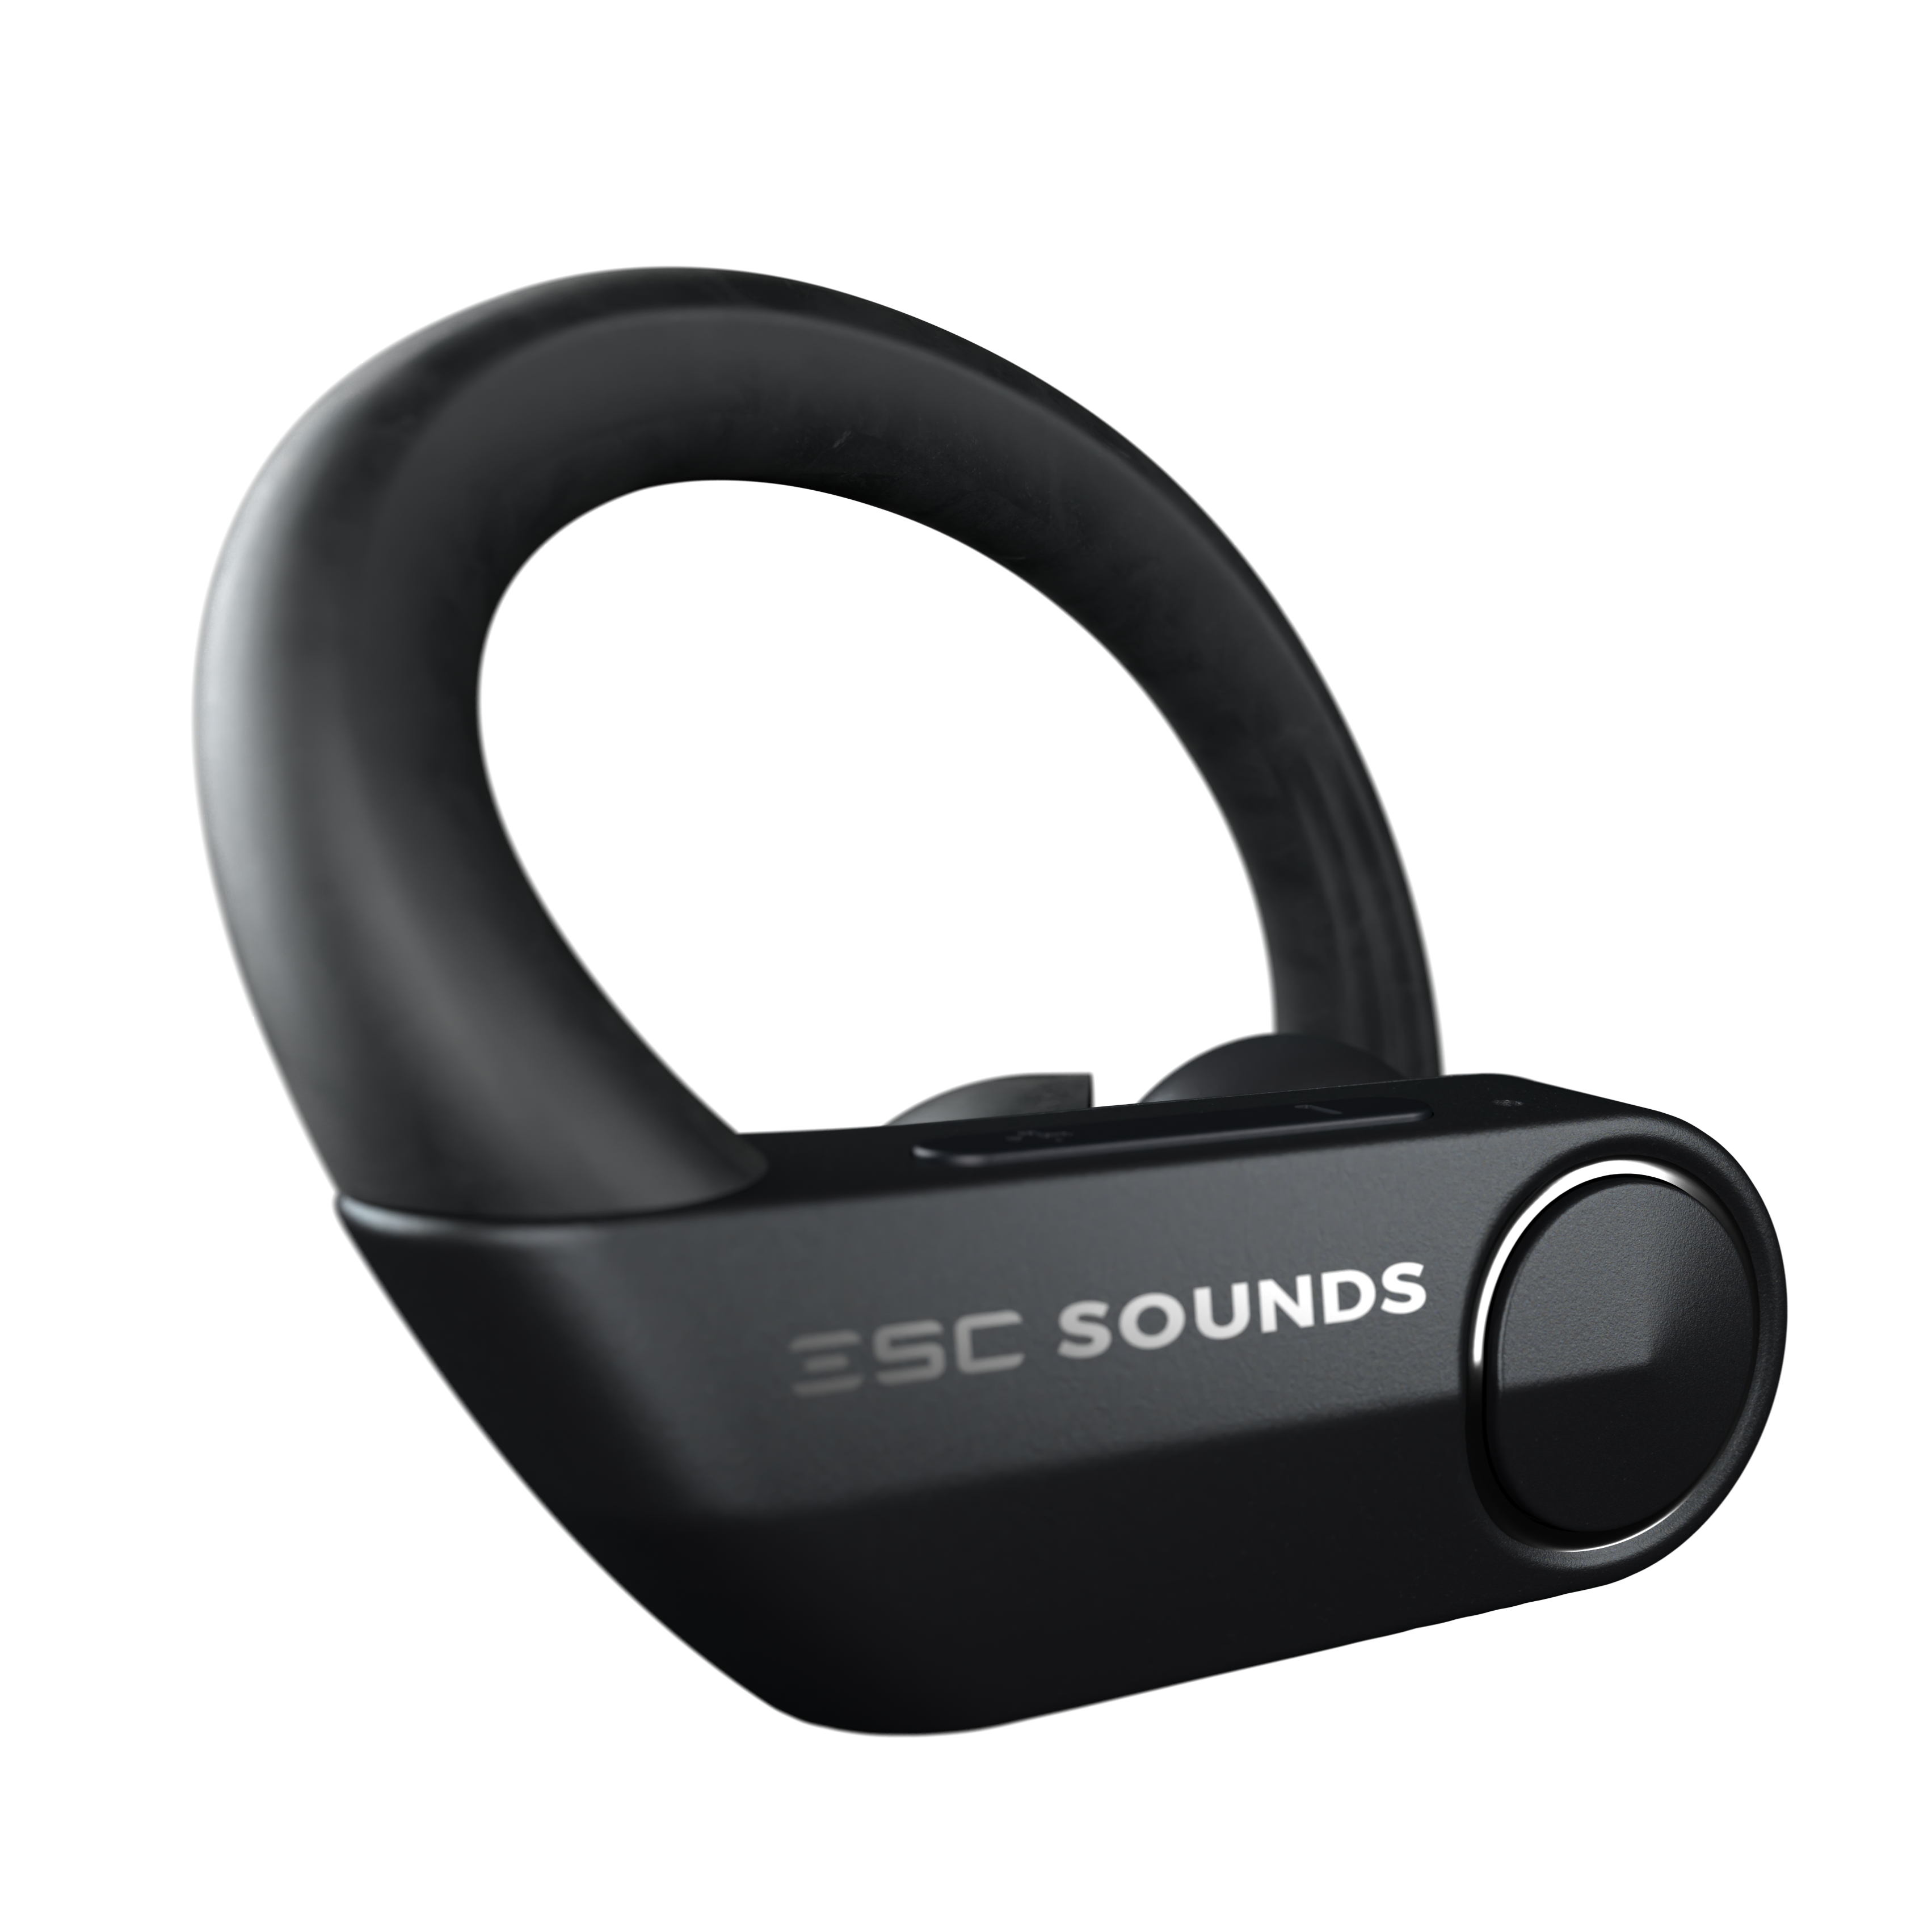 ESC Sounds Series 3 Earbuds. Designed for your workout with developmental input from twelve of our team of CrossFit athletes